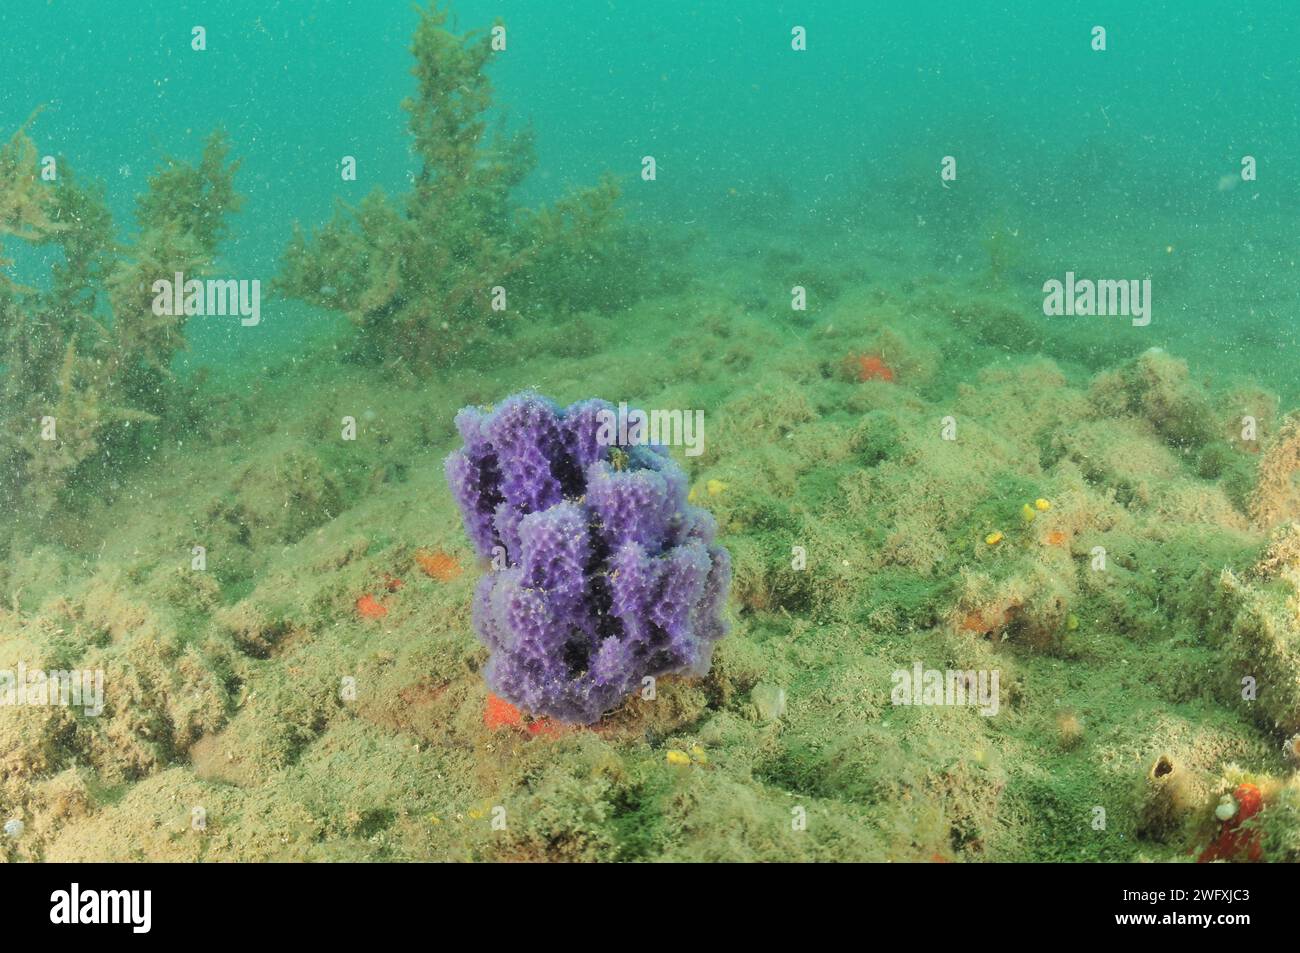 Purple sponge with delicate internal structure standing up from seabed covered with fine sediment. Location: Mahurangi Harbour New Zealand Stock Photo